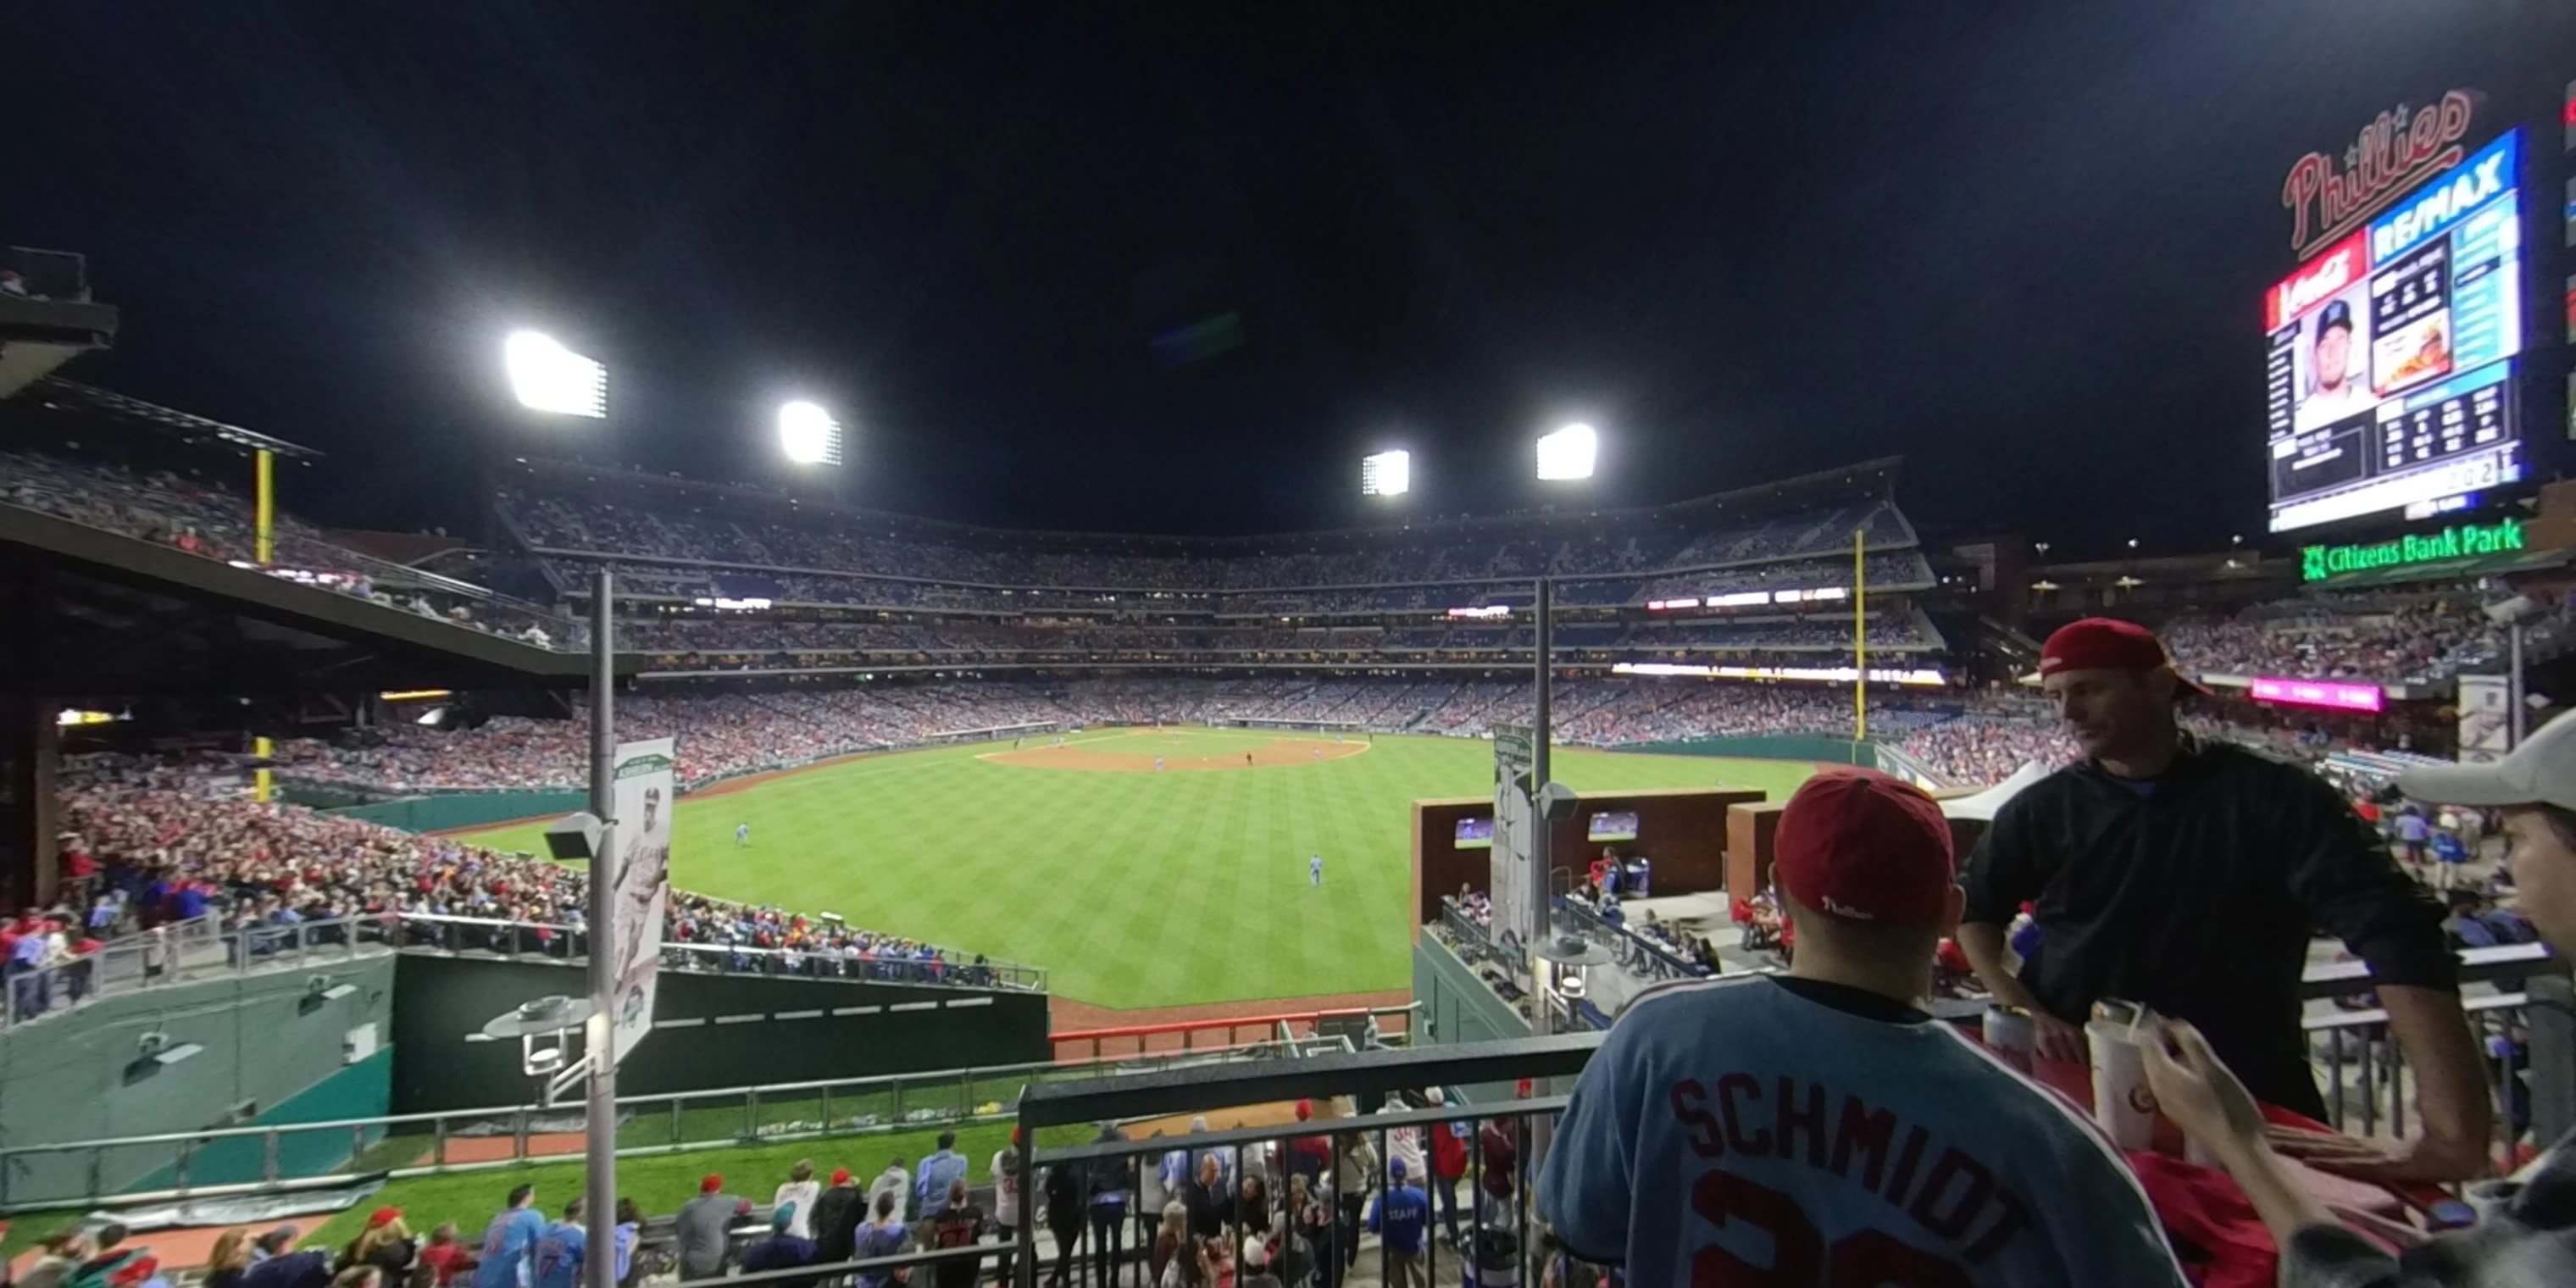 rooftop bleachers panoramic seat view  for baseball - citizens bank park